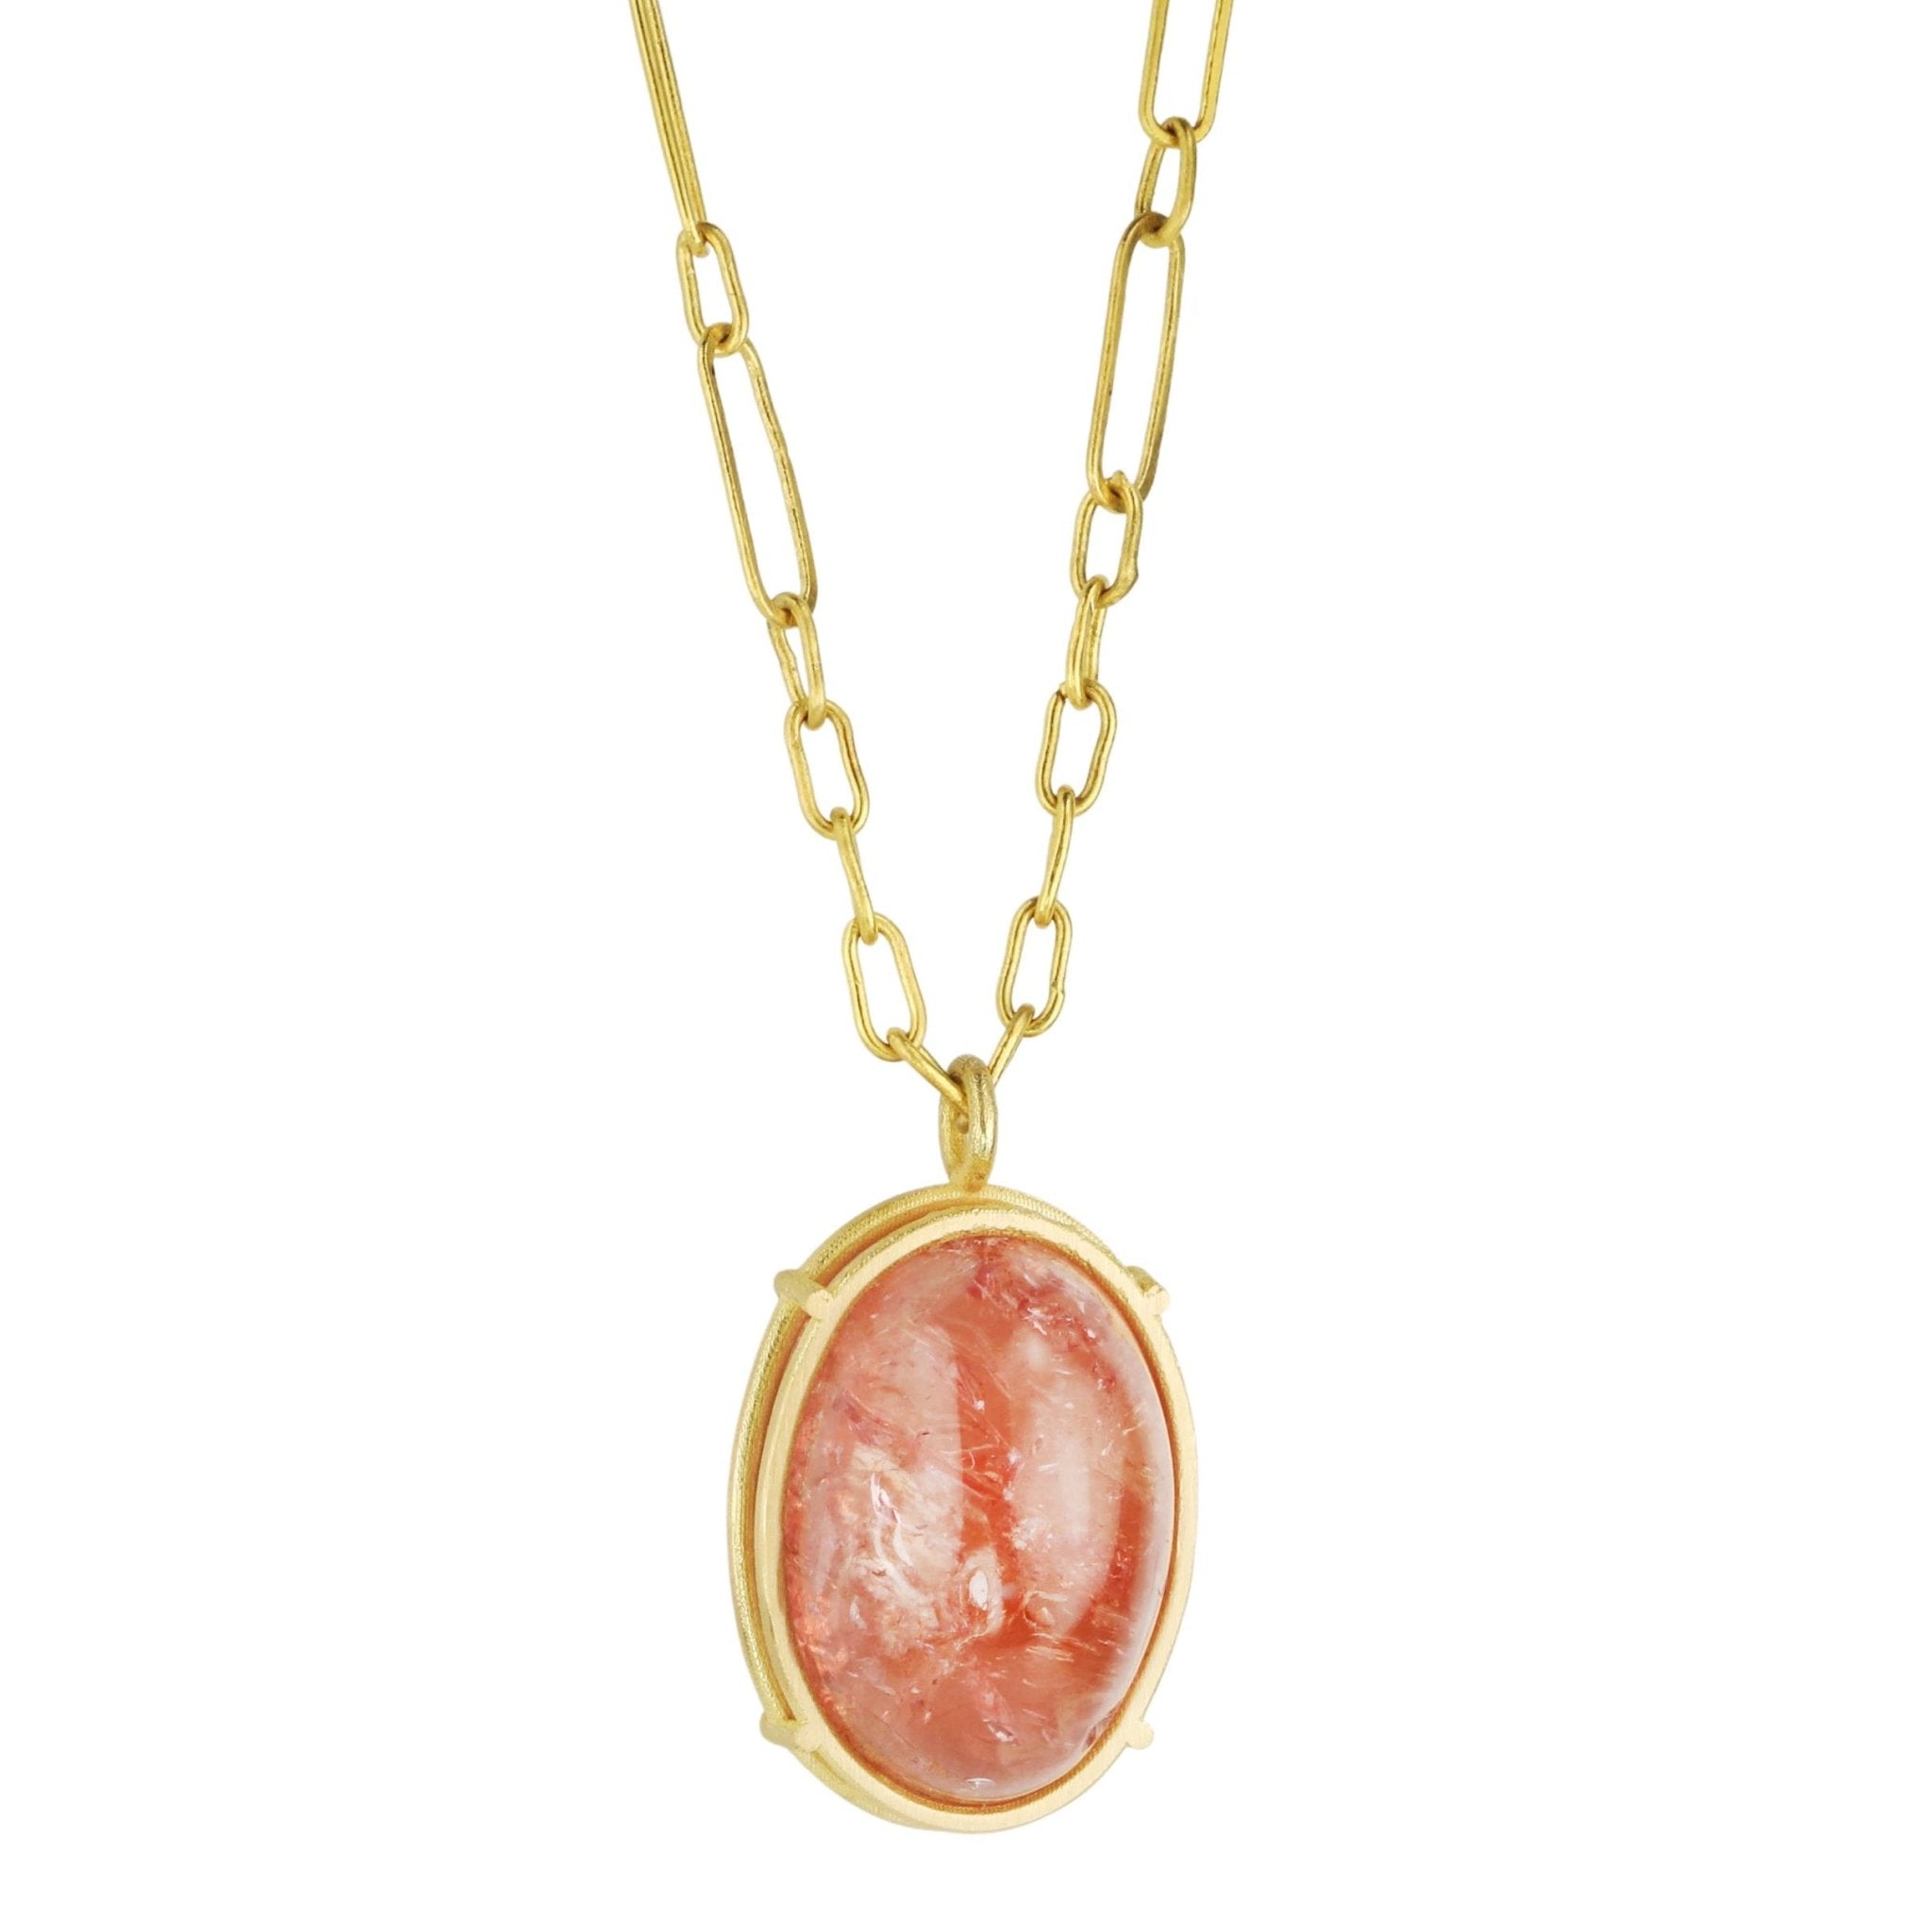 Rosanne Pugliese Cage-Set Cabochon Imperial Topaz Necklace on 22K Gold Chain